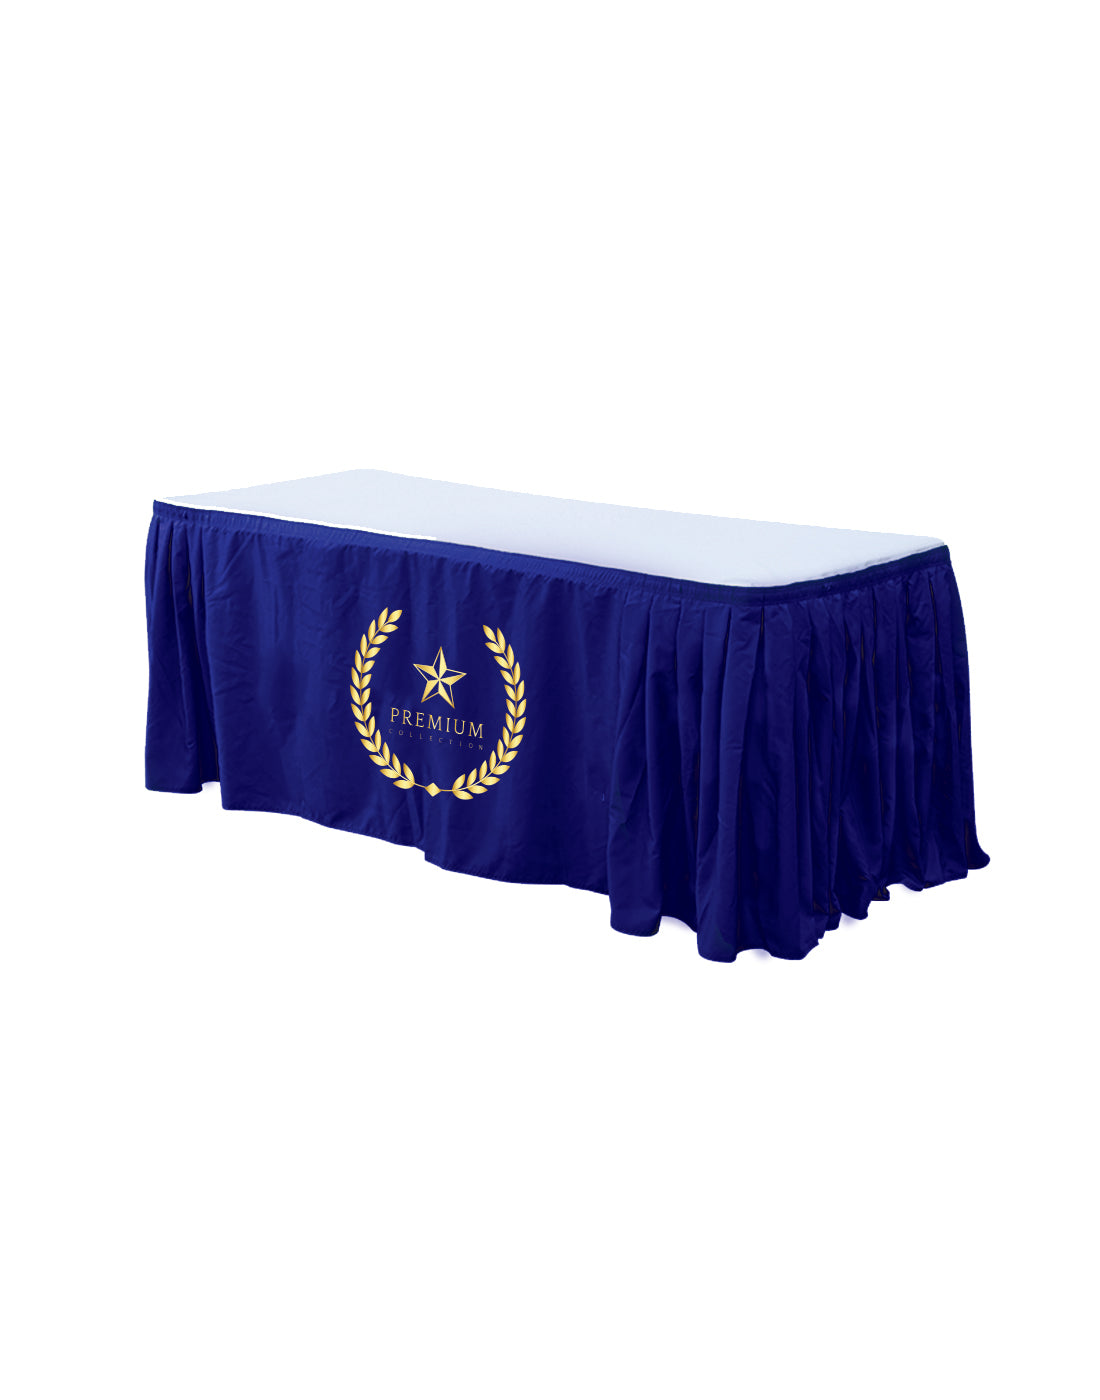 Custom Fitted Table Skirts without Top